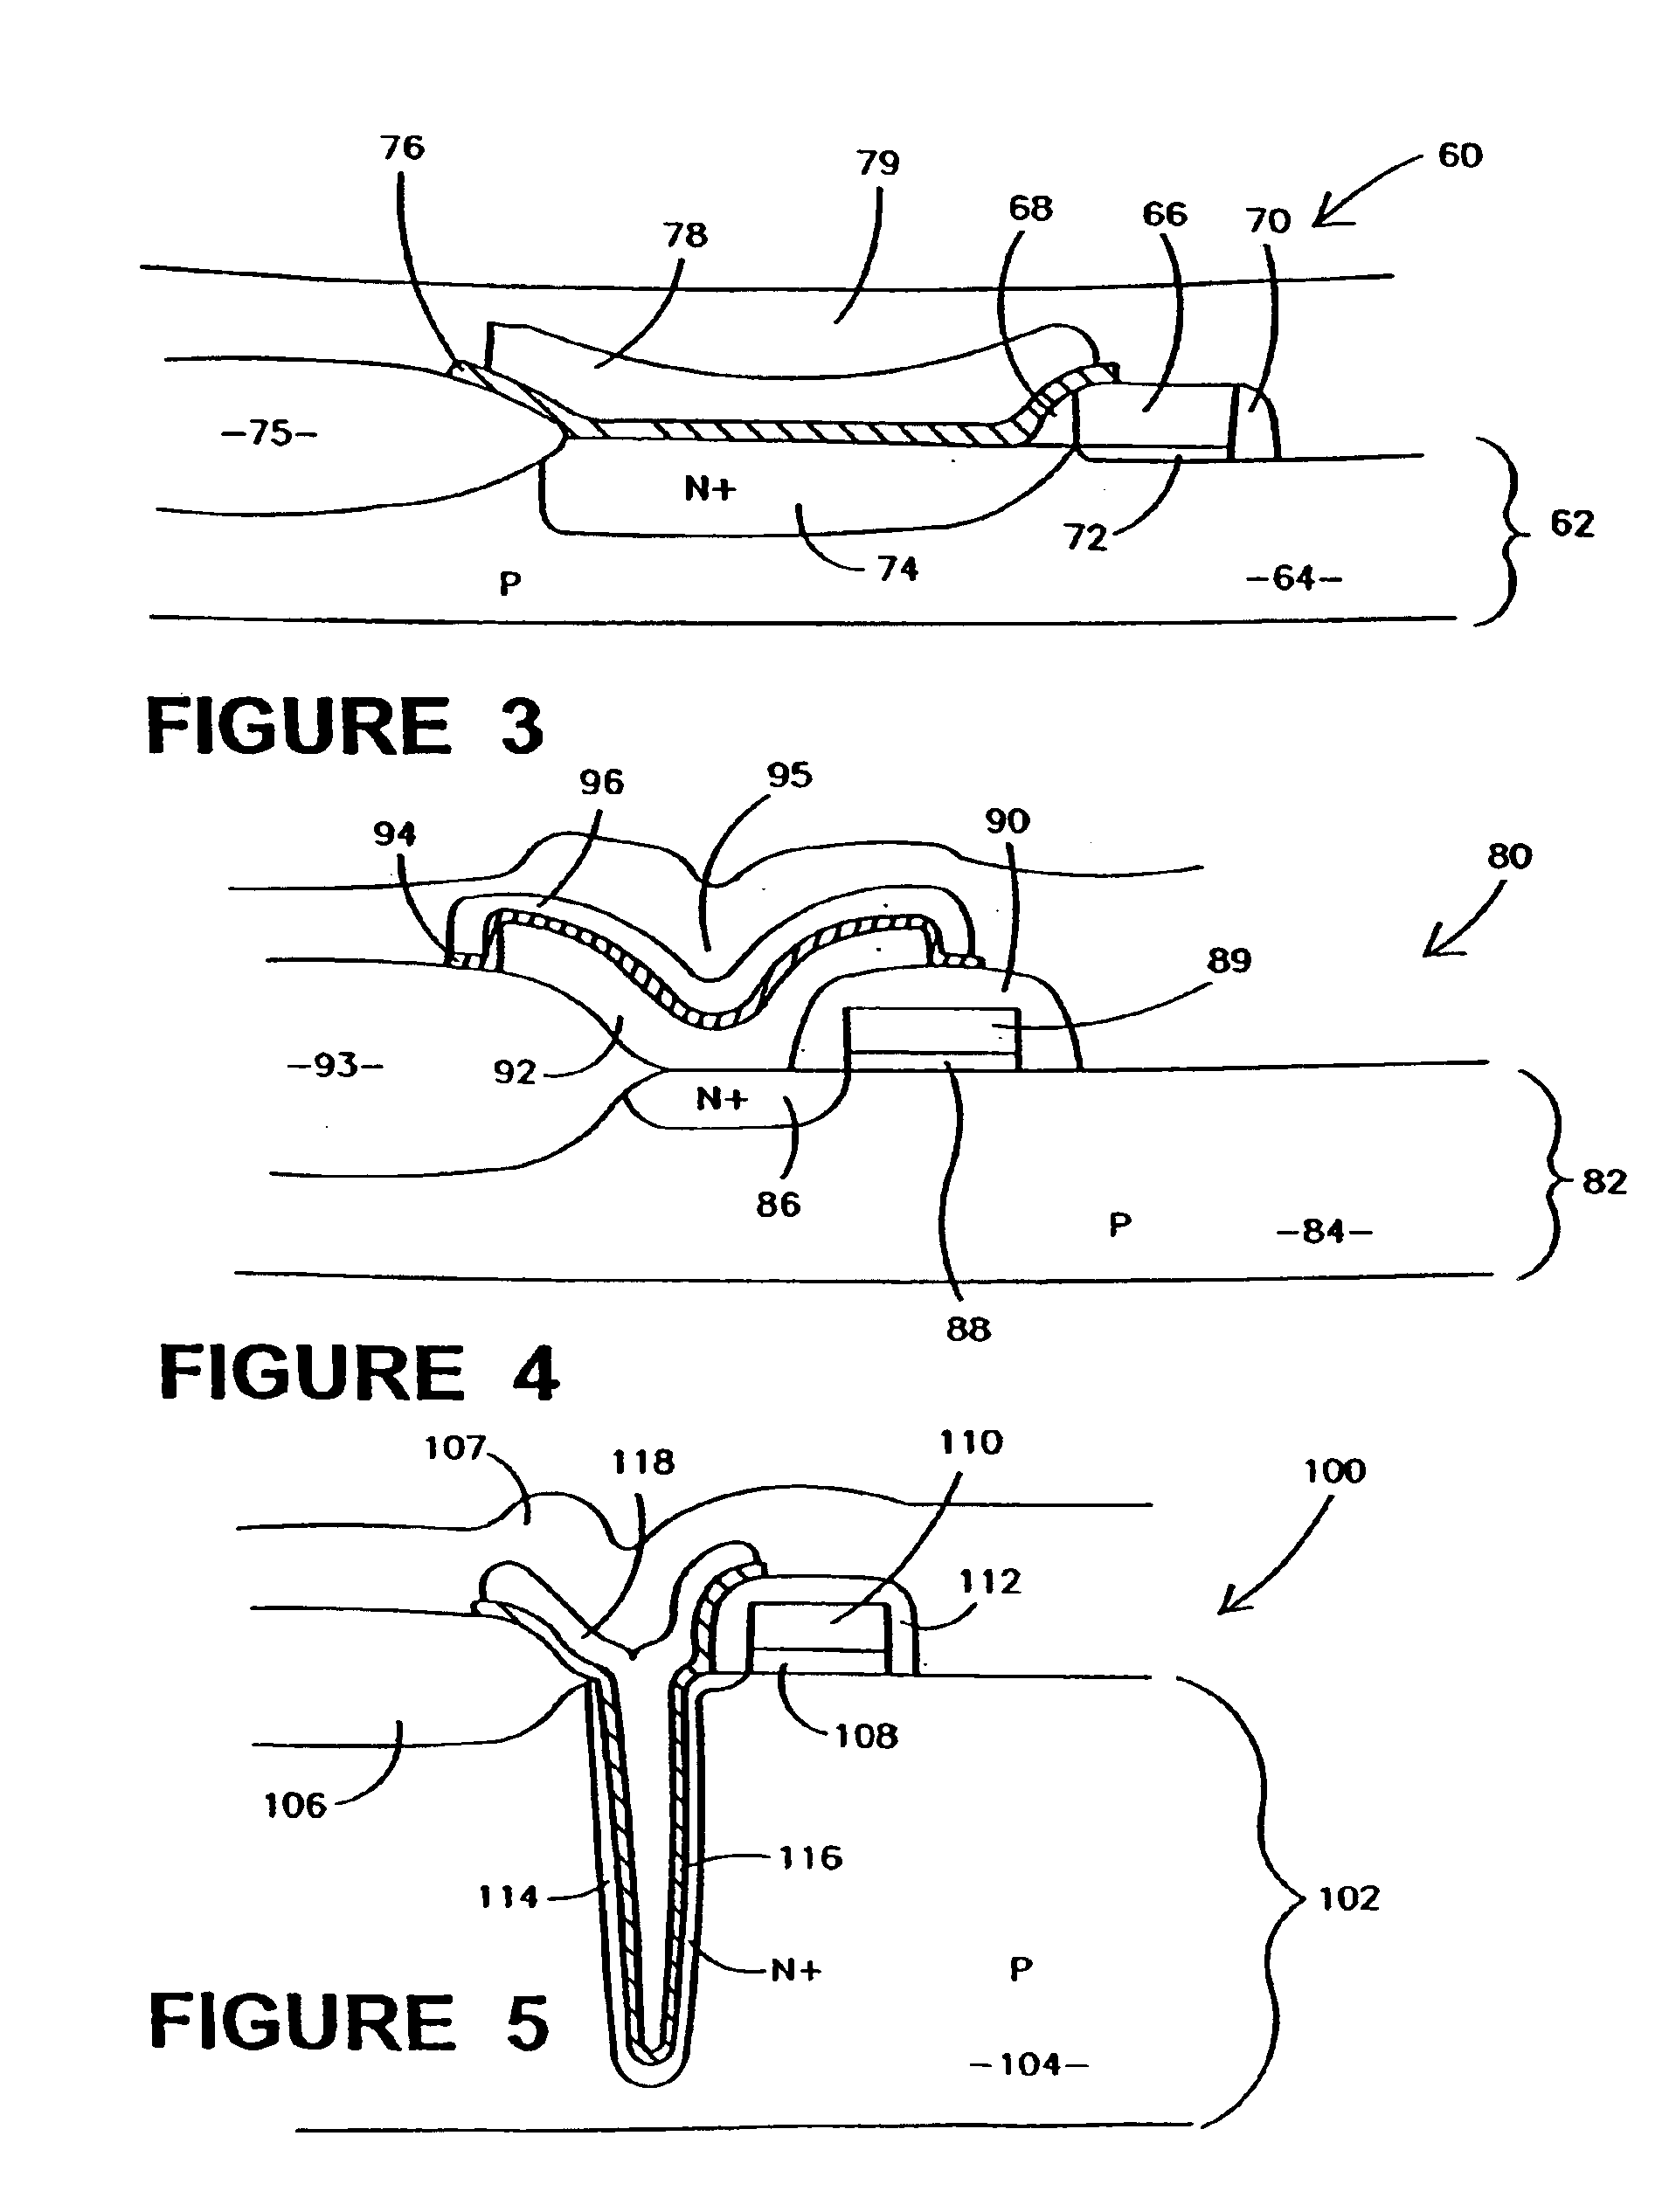 Methods for use in forming a capacitor and structures resulting from same